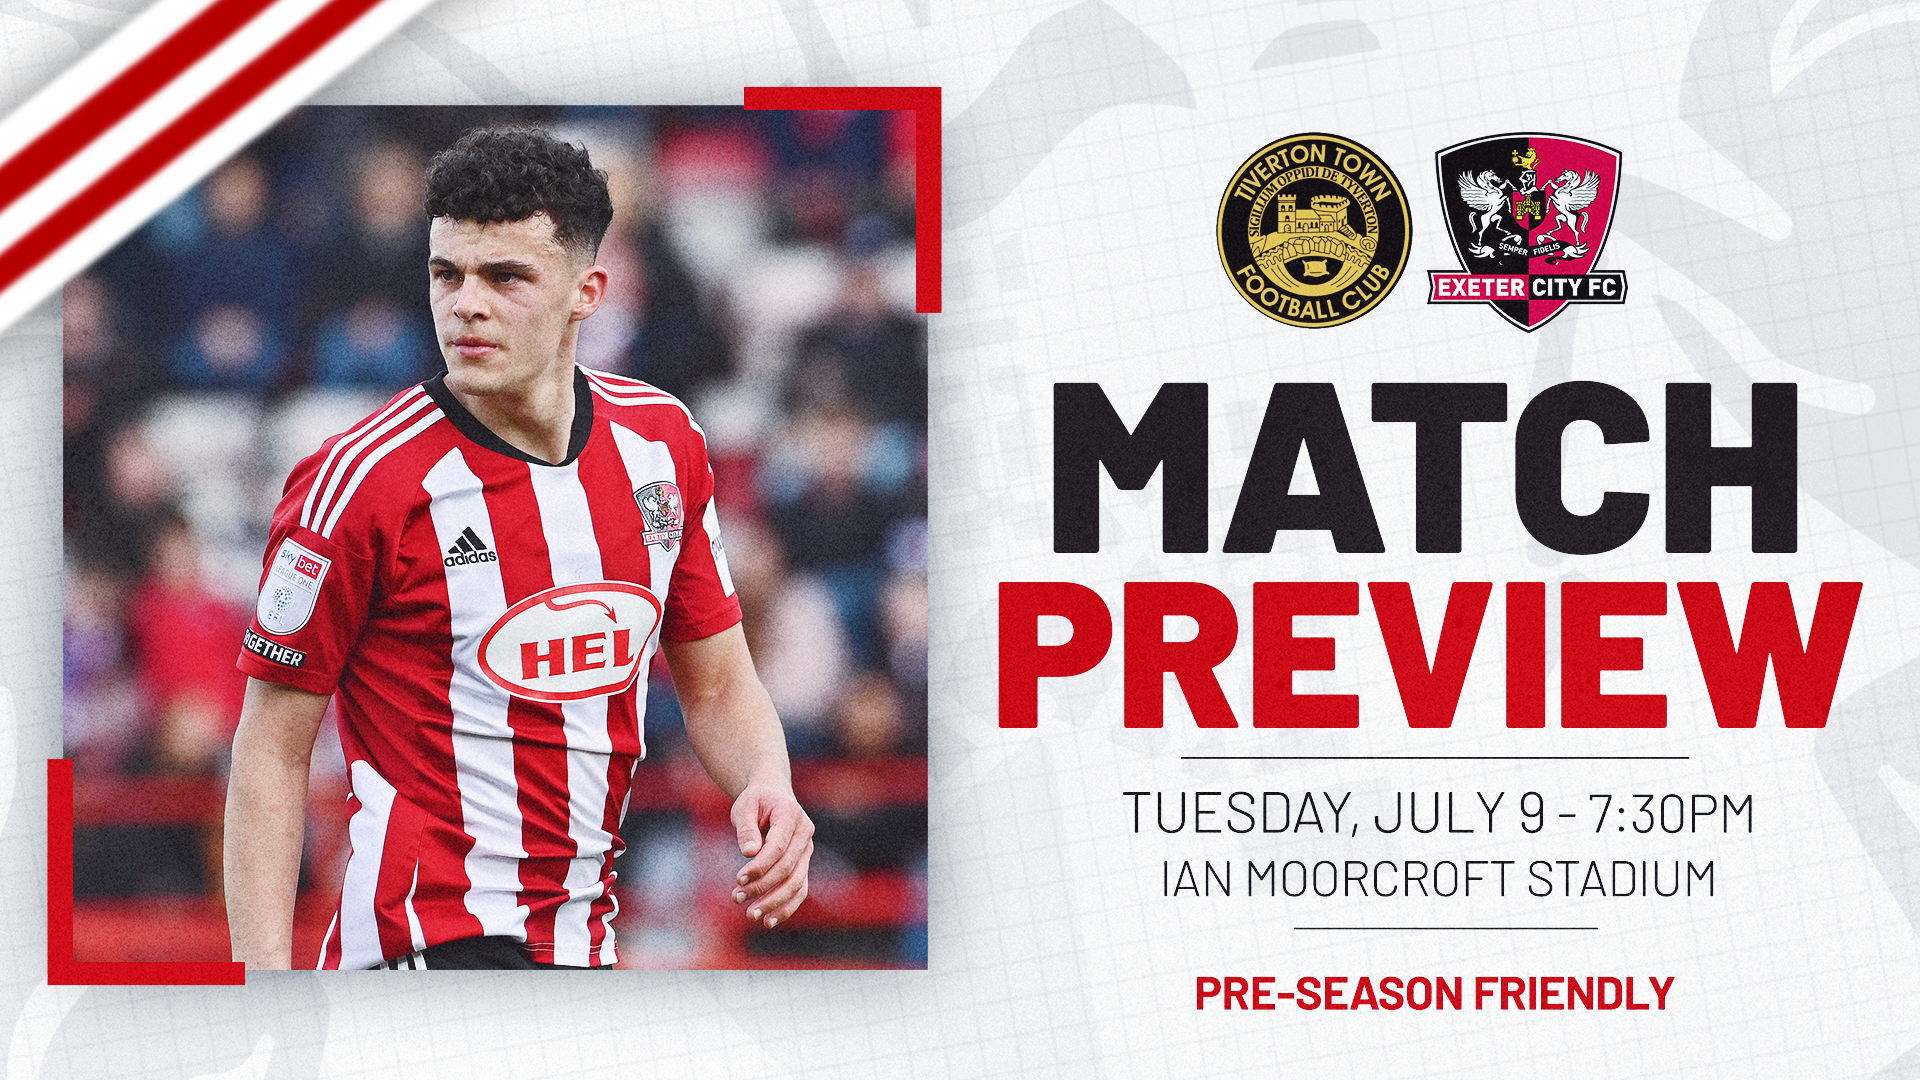 Match Preview image for Tiverton Town vs Exeter City